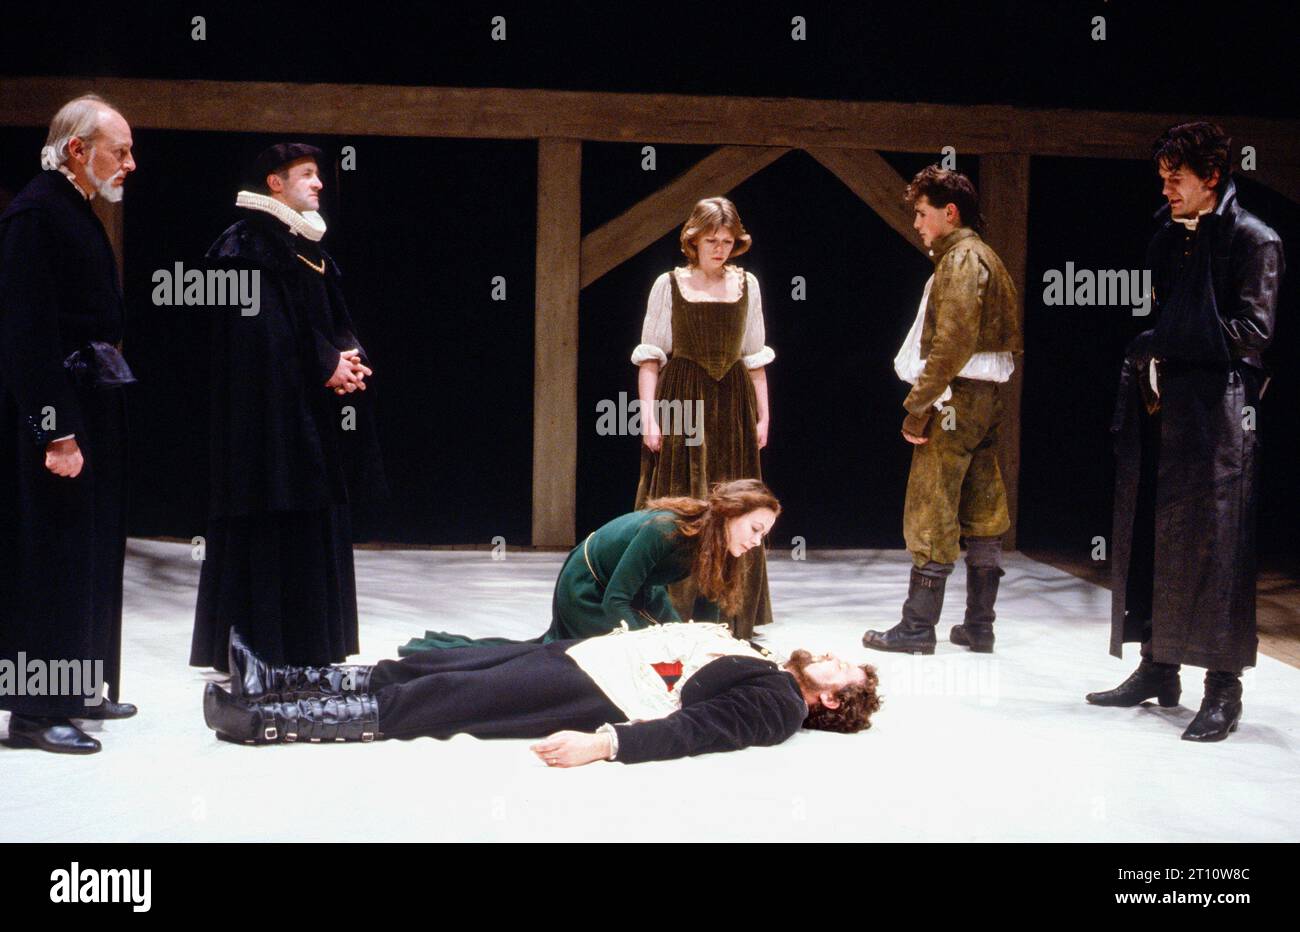 standing, l-r: Jeffery Dench (Franklin), Paul Webster (Mayor), Cathy Finlay (Susan), Mark Rylance (Michael), Robert O'Mahoney (Mosby)  front centre: Jenny Agutter (Alice), Bruce Purchase (Arden) in ARDEN OF FAVERSHAM  by Anonymous at the Royal Shakespeare Company (RSC), The Other Place, Stratford-upon-Avon, England  30/03/1982 music: Nigel Hess  design: Kandis Cook  fights: Ian McKay  director: Terry Hands Stock Photo